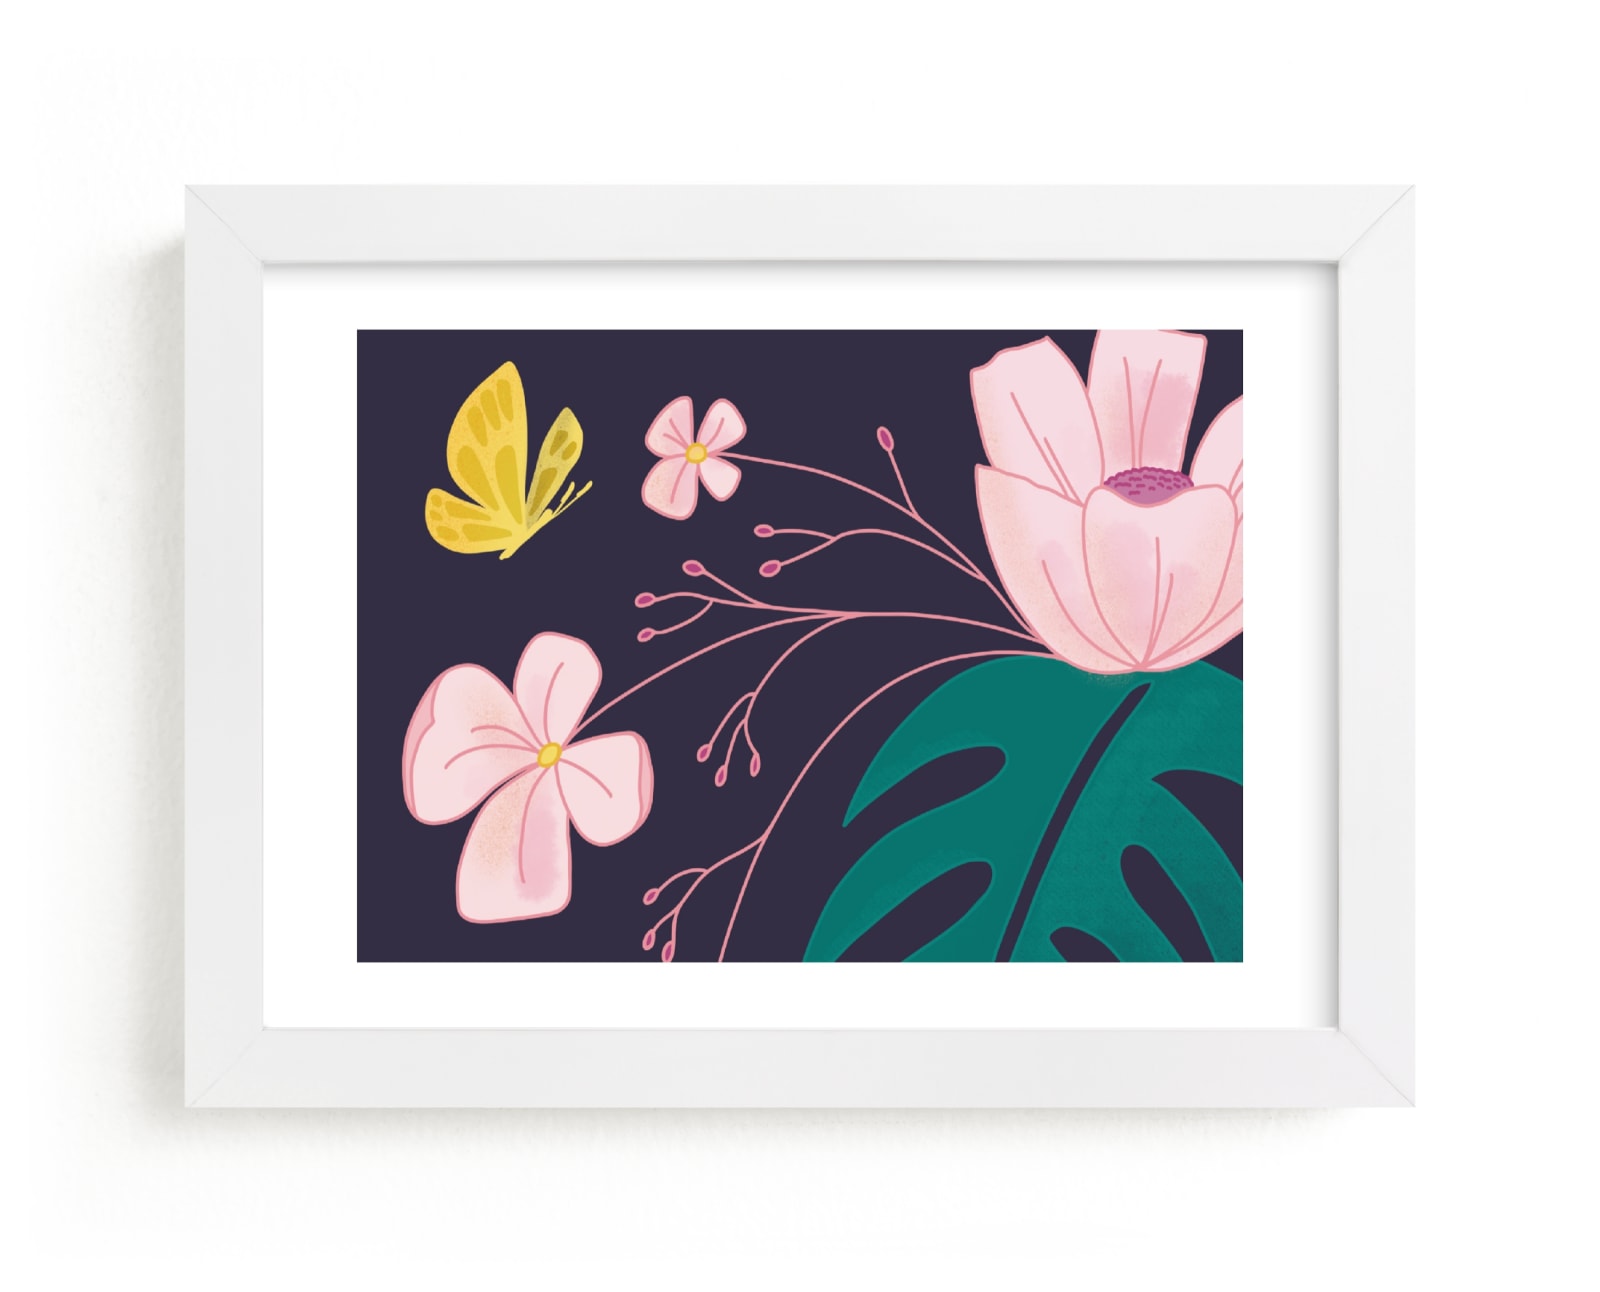 "Evening Blooms 2" - Limited Edition Art Print by Haley Warner in beautiful frame options and a variety of sizes.